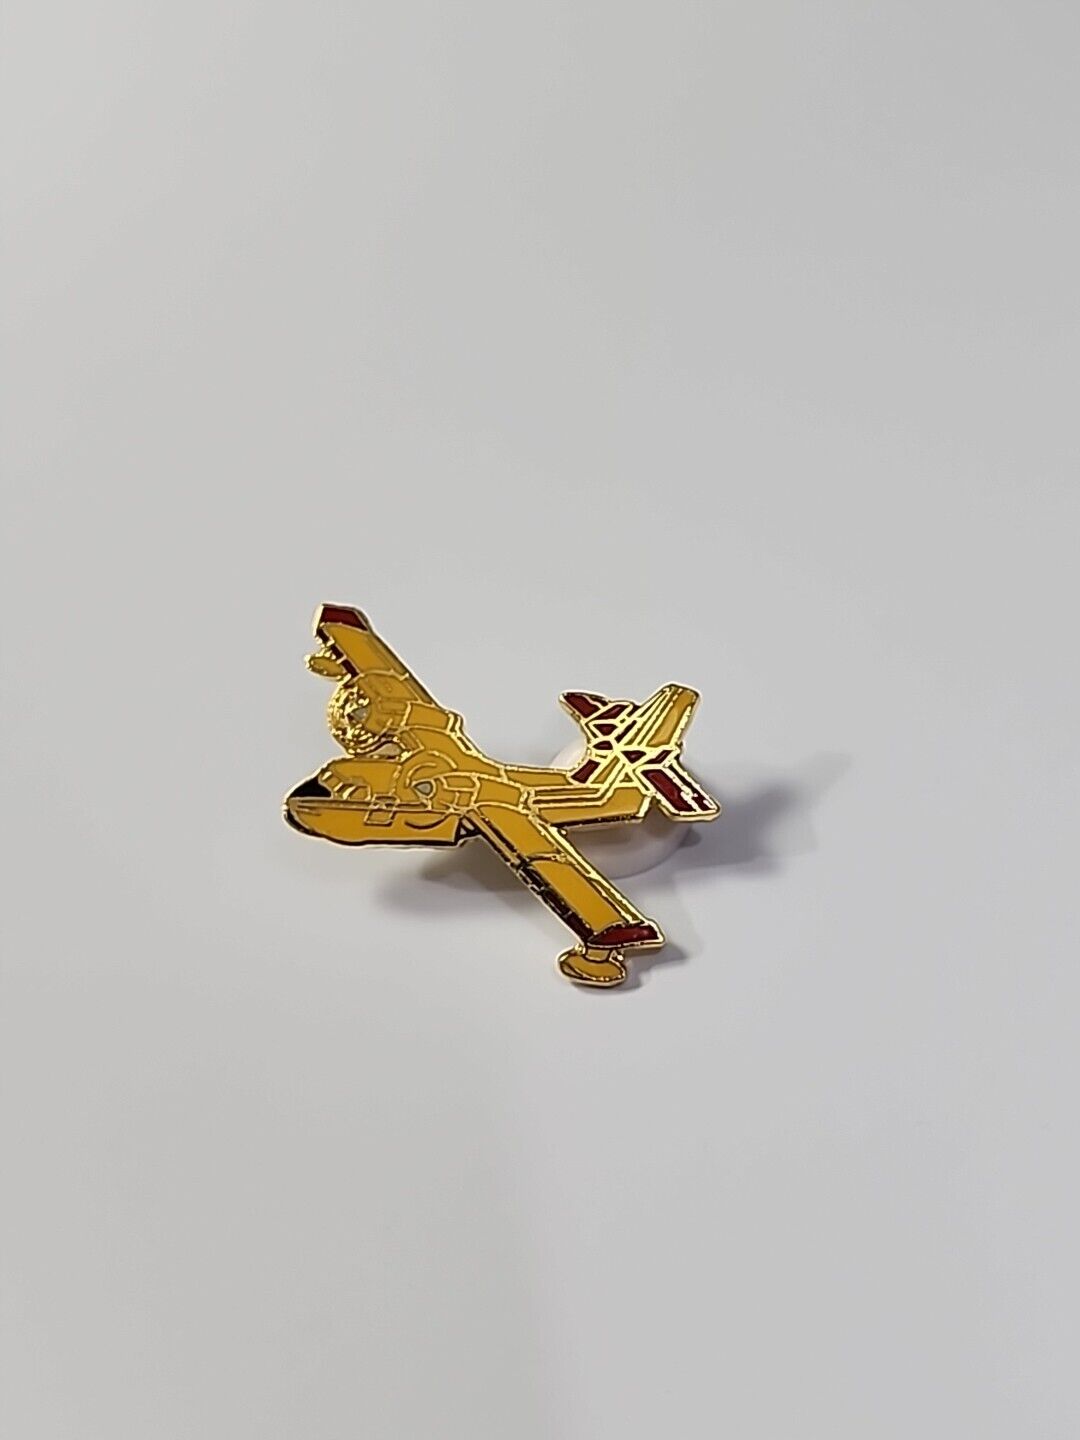 Canadair CL-215 Superscooper Lapel Pin Bombardier 415 Aerial Firefighting Plane